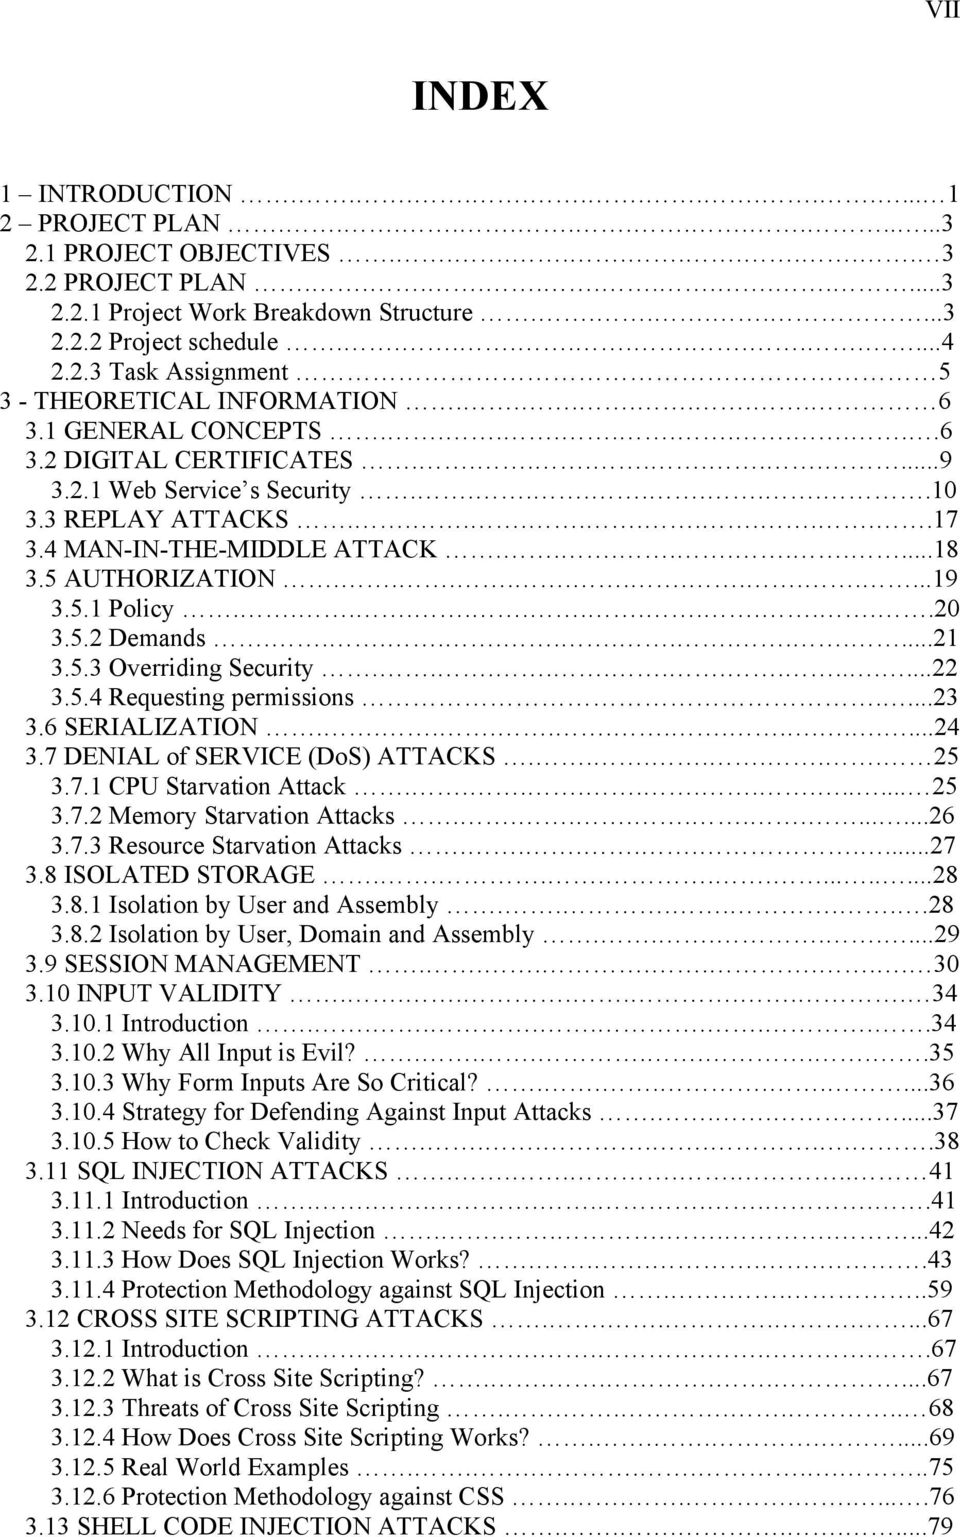 3 REPLAY ATTACKS...........17 3.4 MAN-IN-THE-MIDDLE ATTACK..........18 3.5 AUTHORIZATION.............19 3.5.1 Policy.............20 3.5.2 Demands..............21 3.5.3 Overriding Security..............22 3.